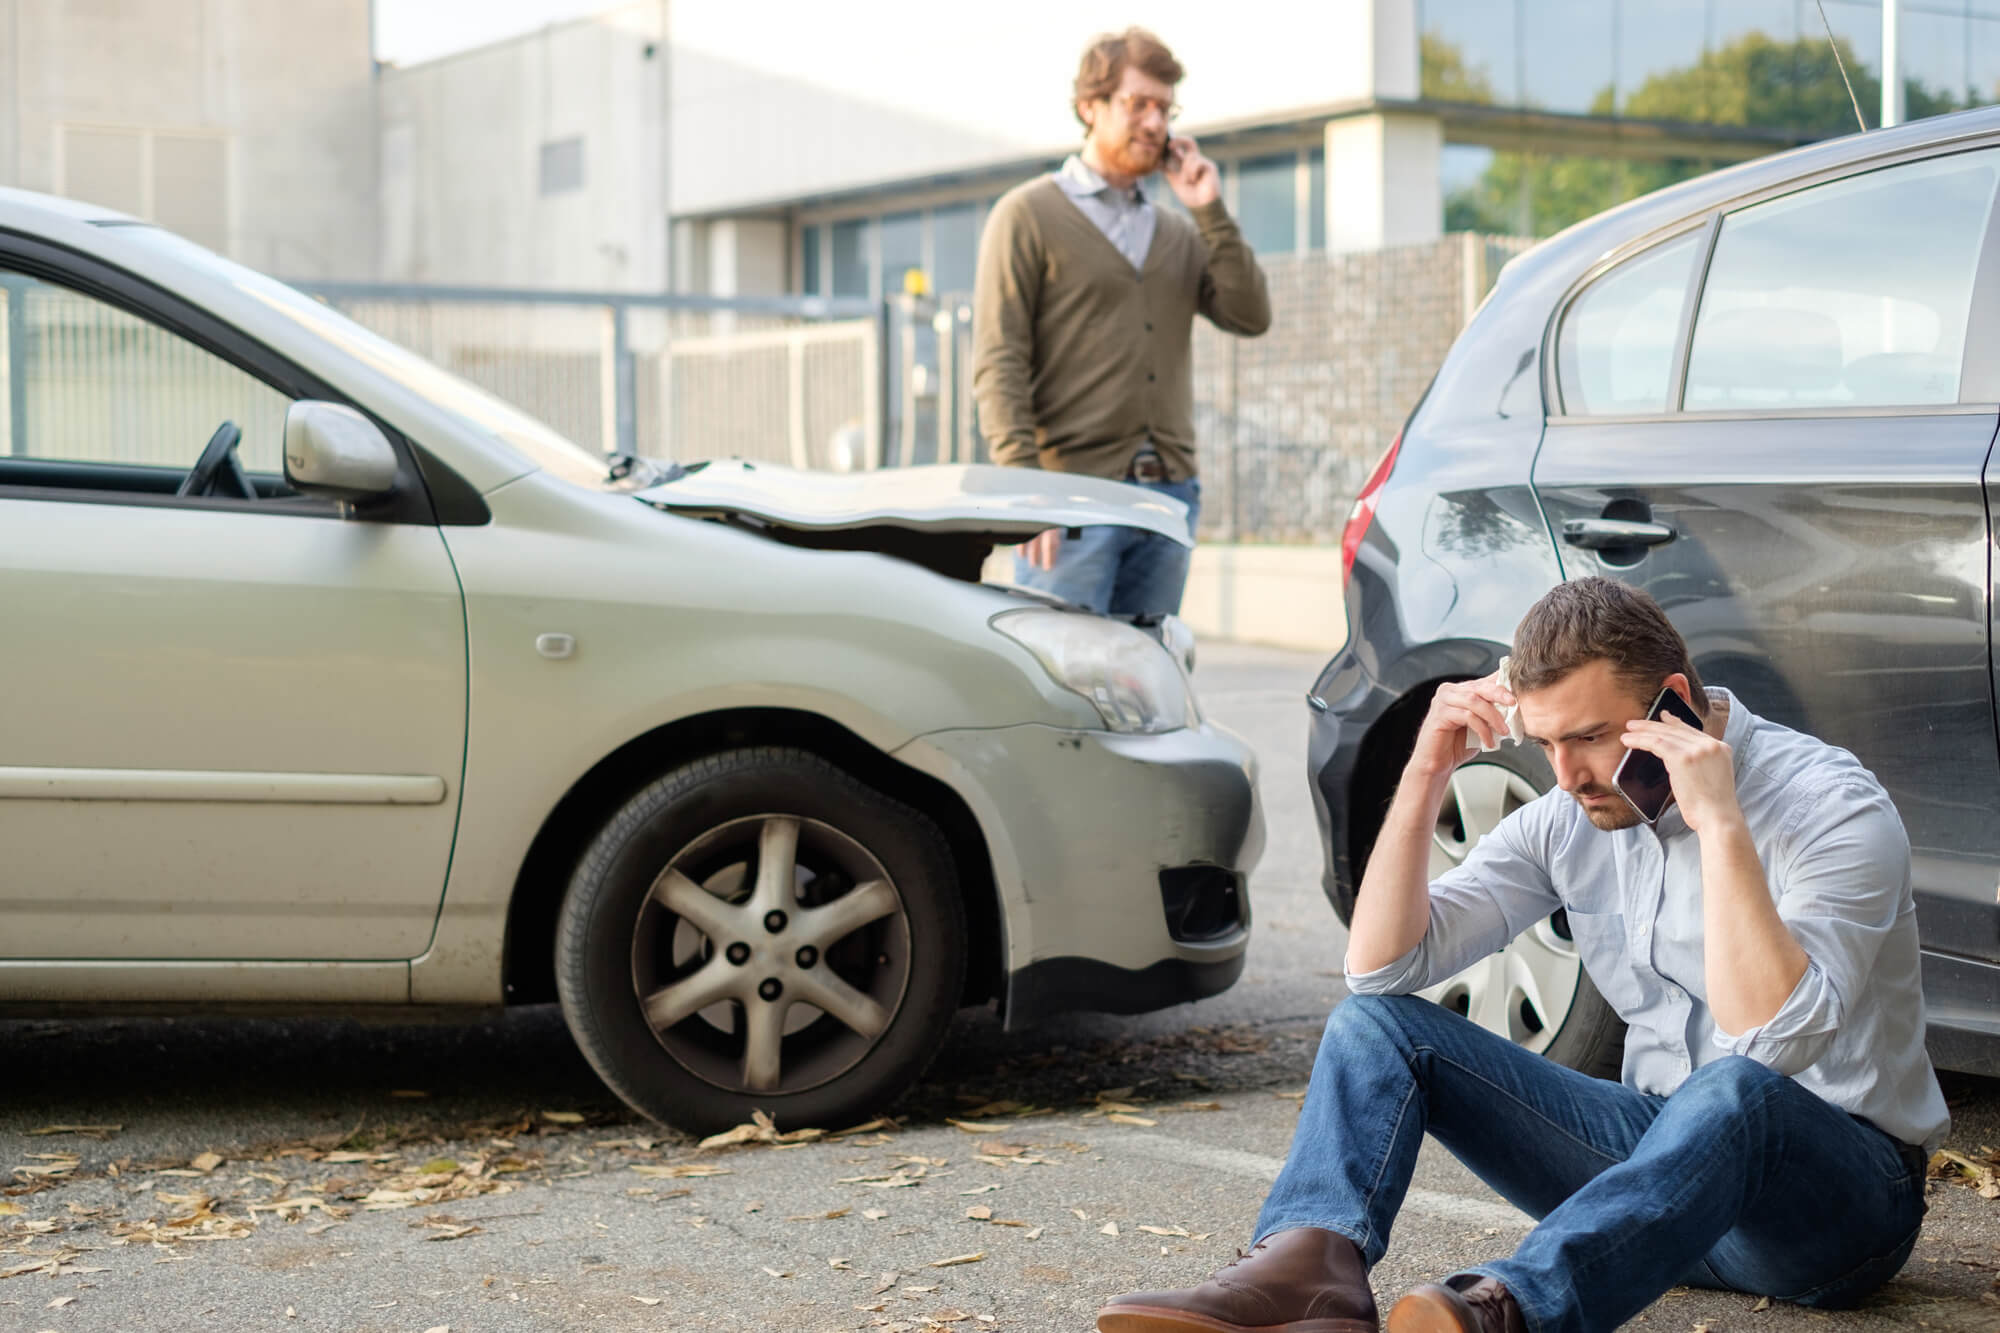 Car rental after an accident - The 6 most important points